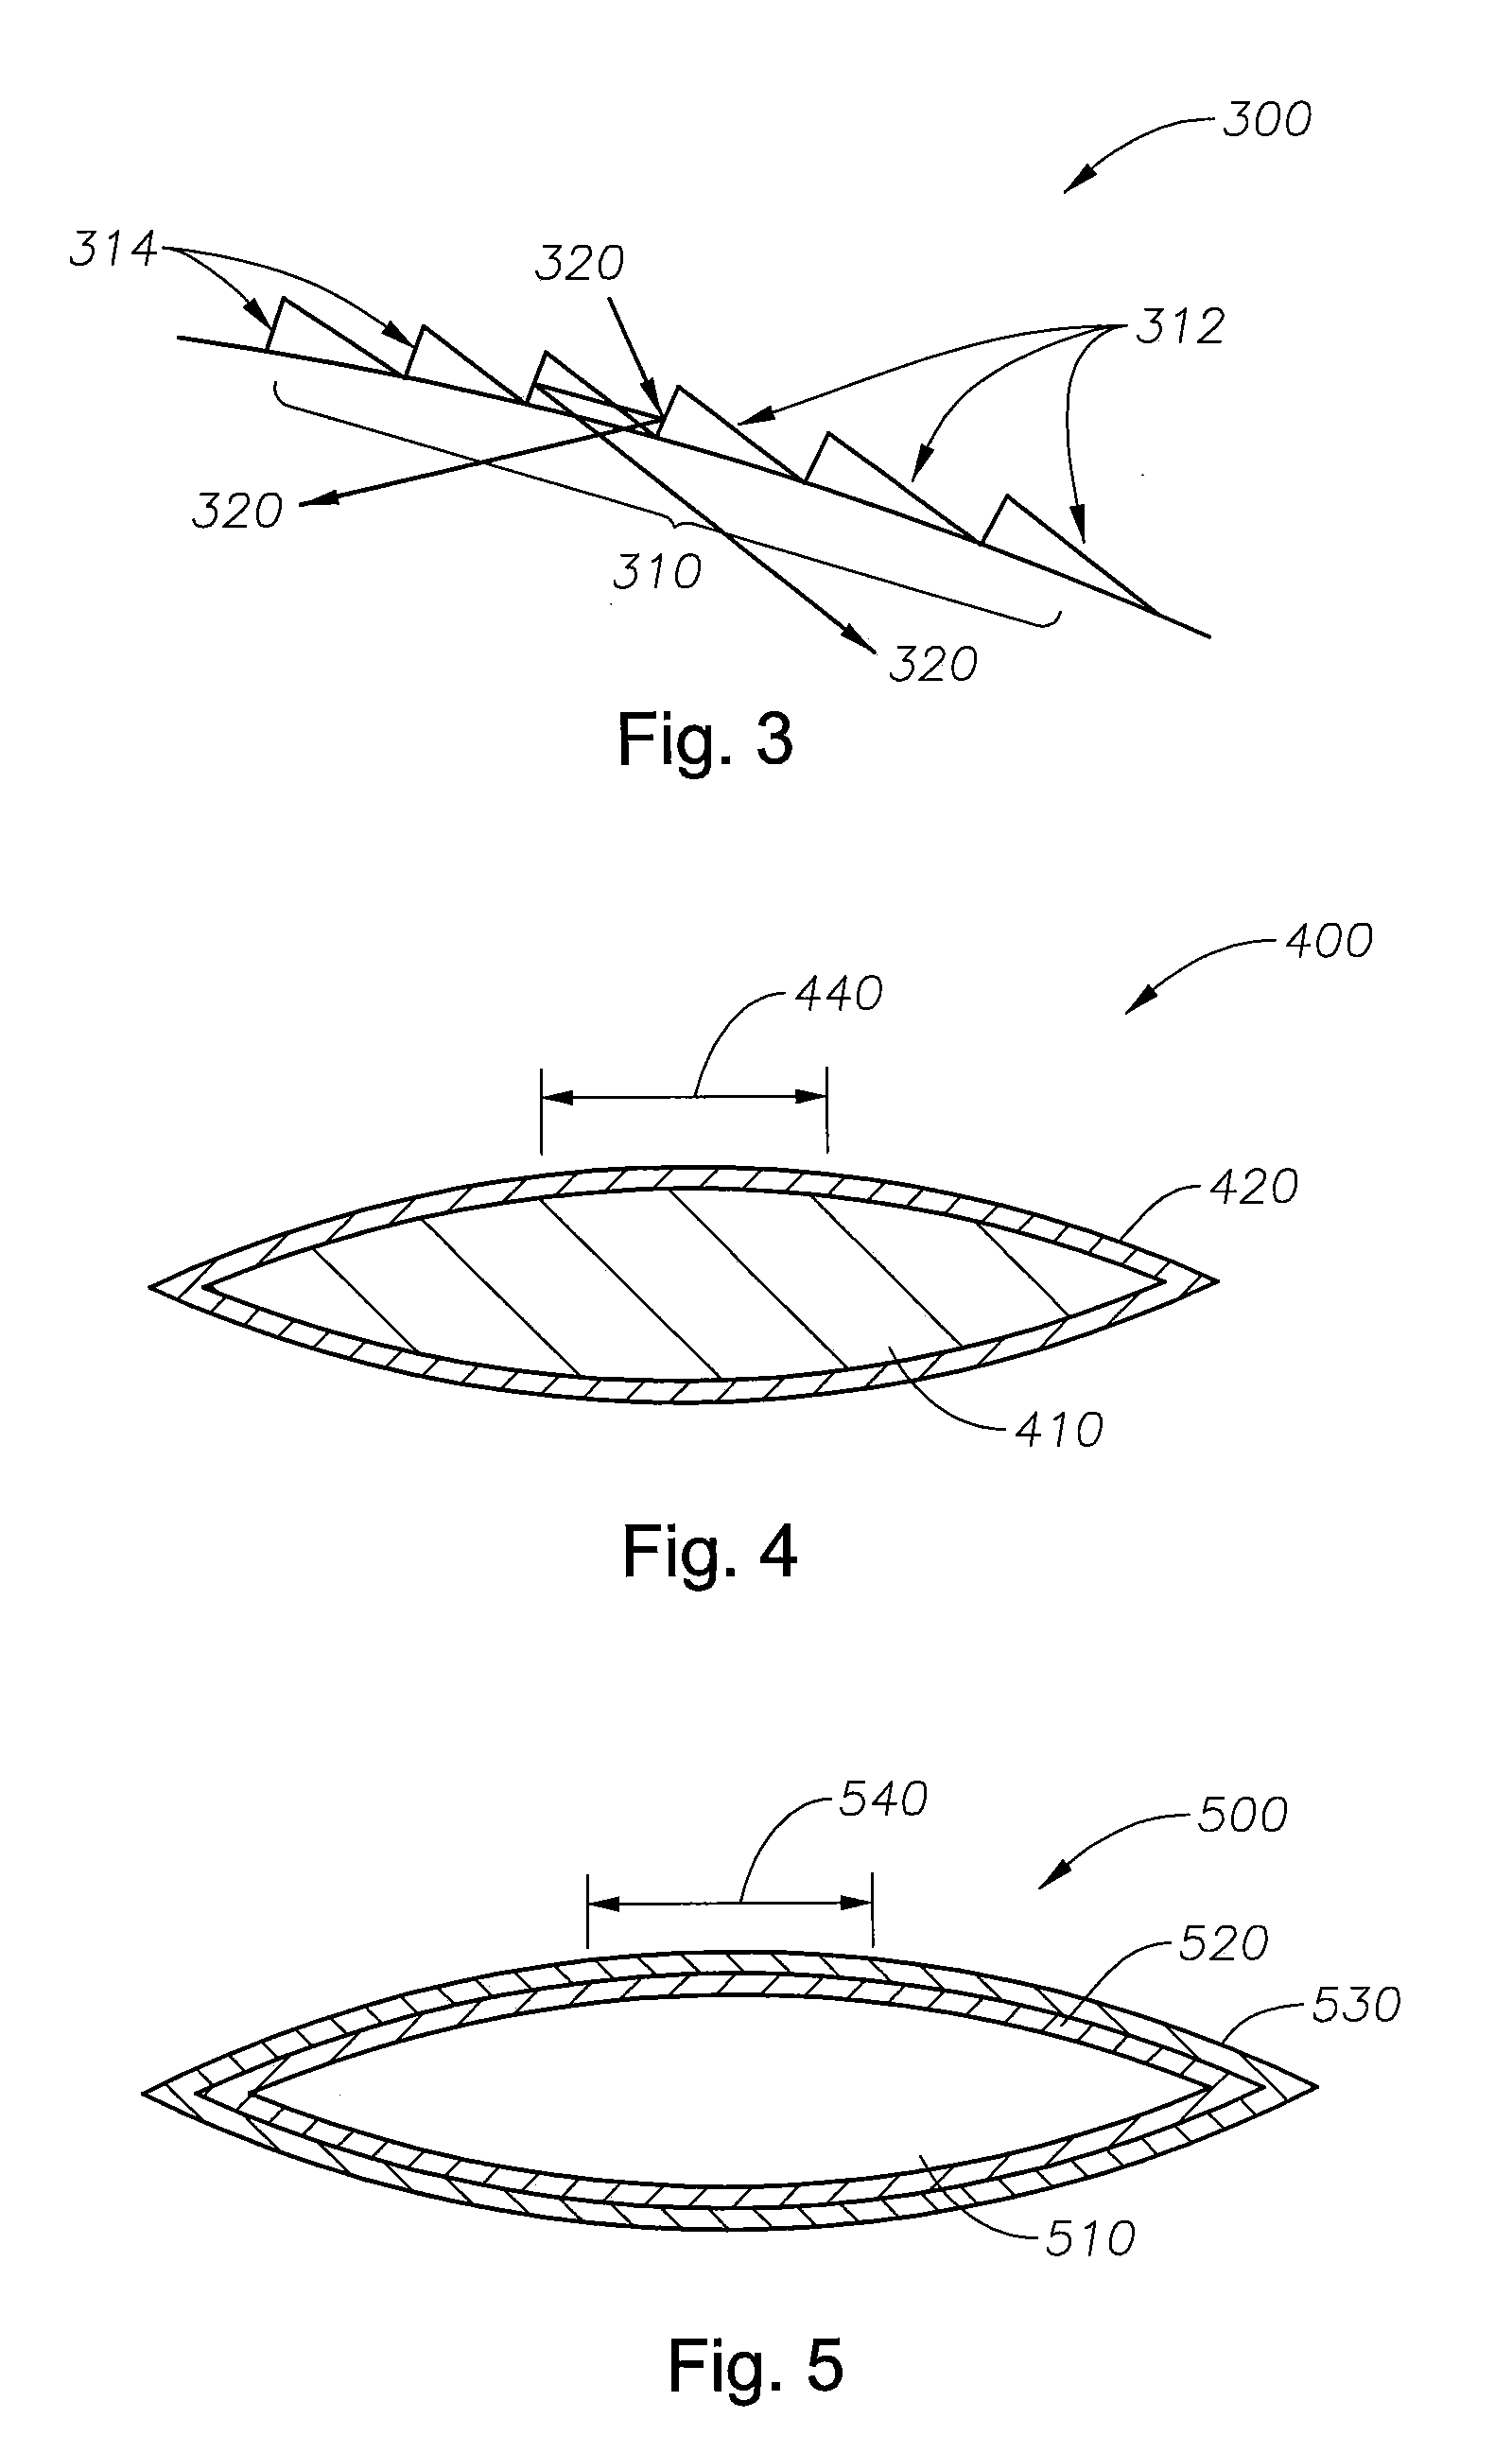 Off-axis Anti-reflective intraocular lenses